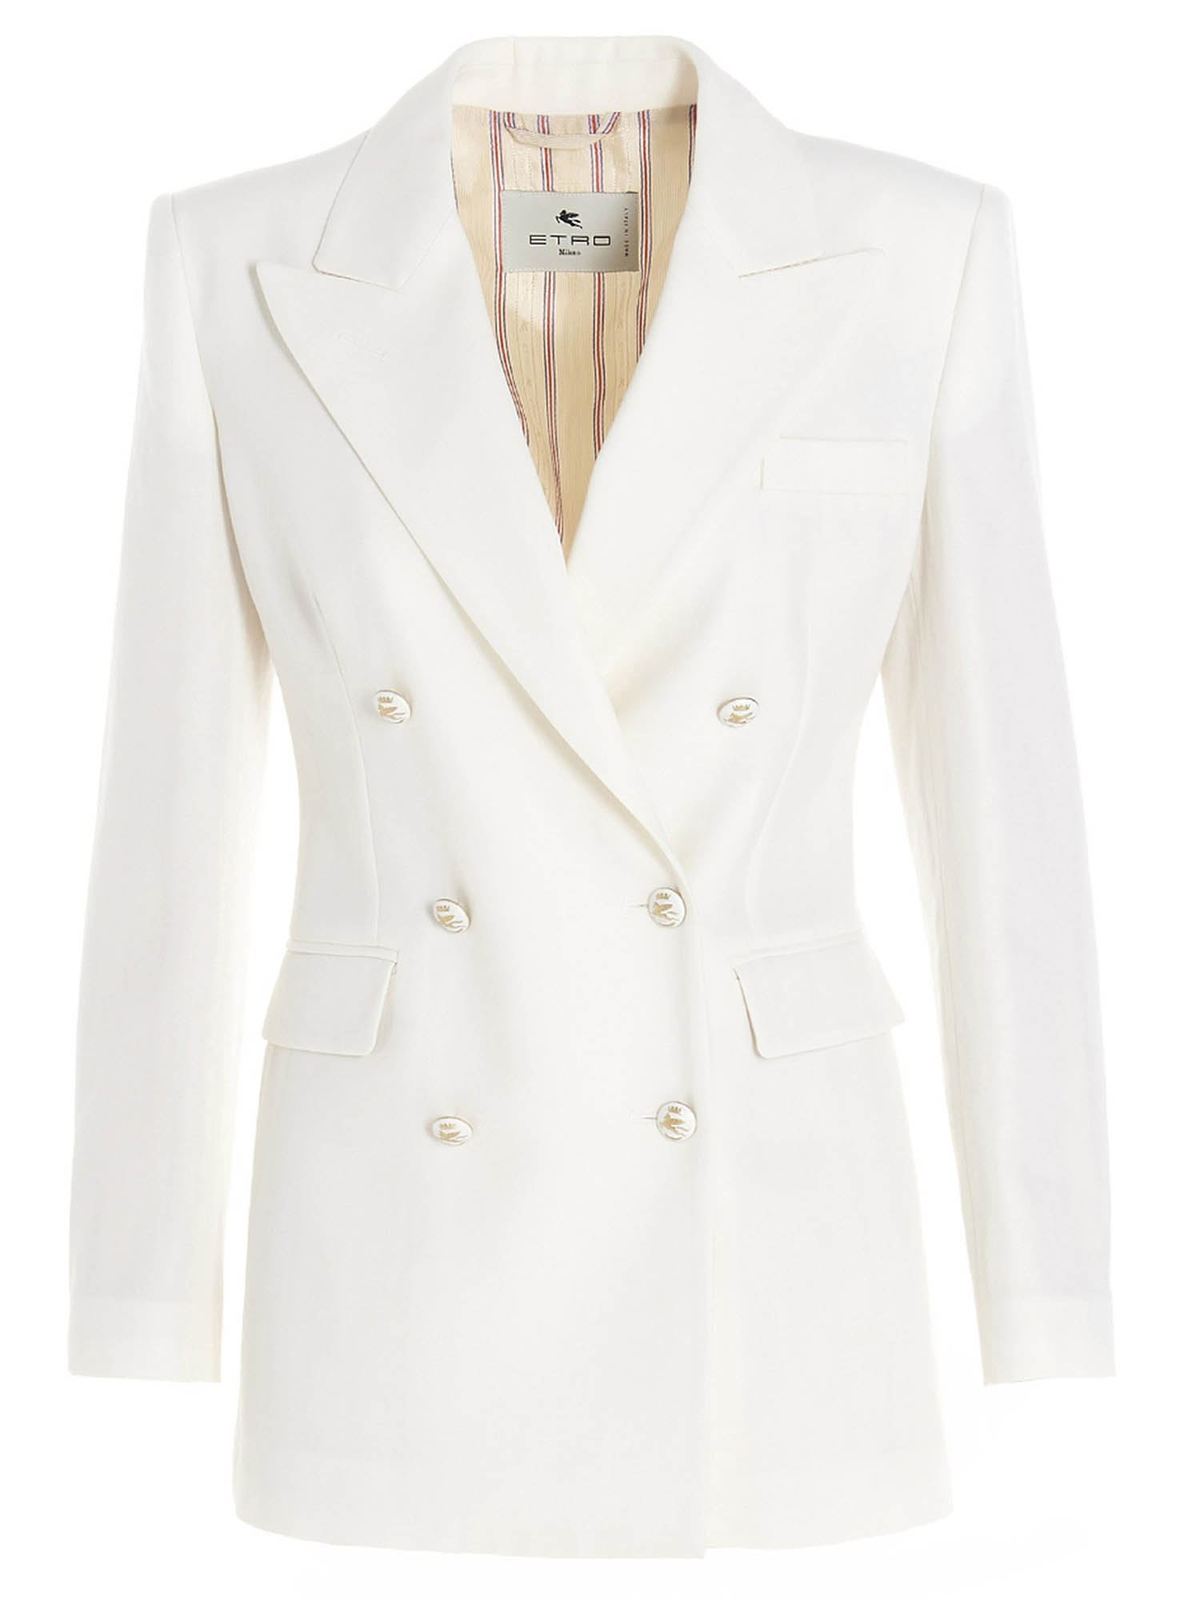 Etro - Double-breasted jacket in white - blazers - 1404805810990